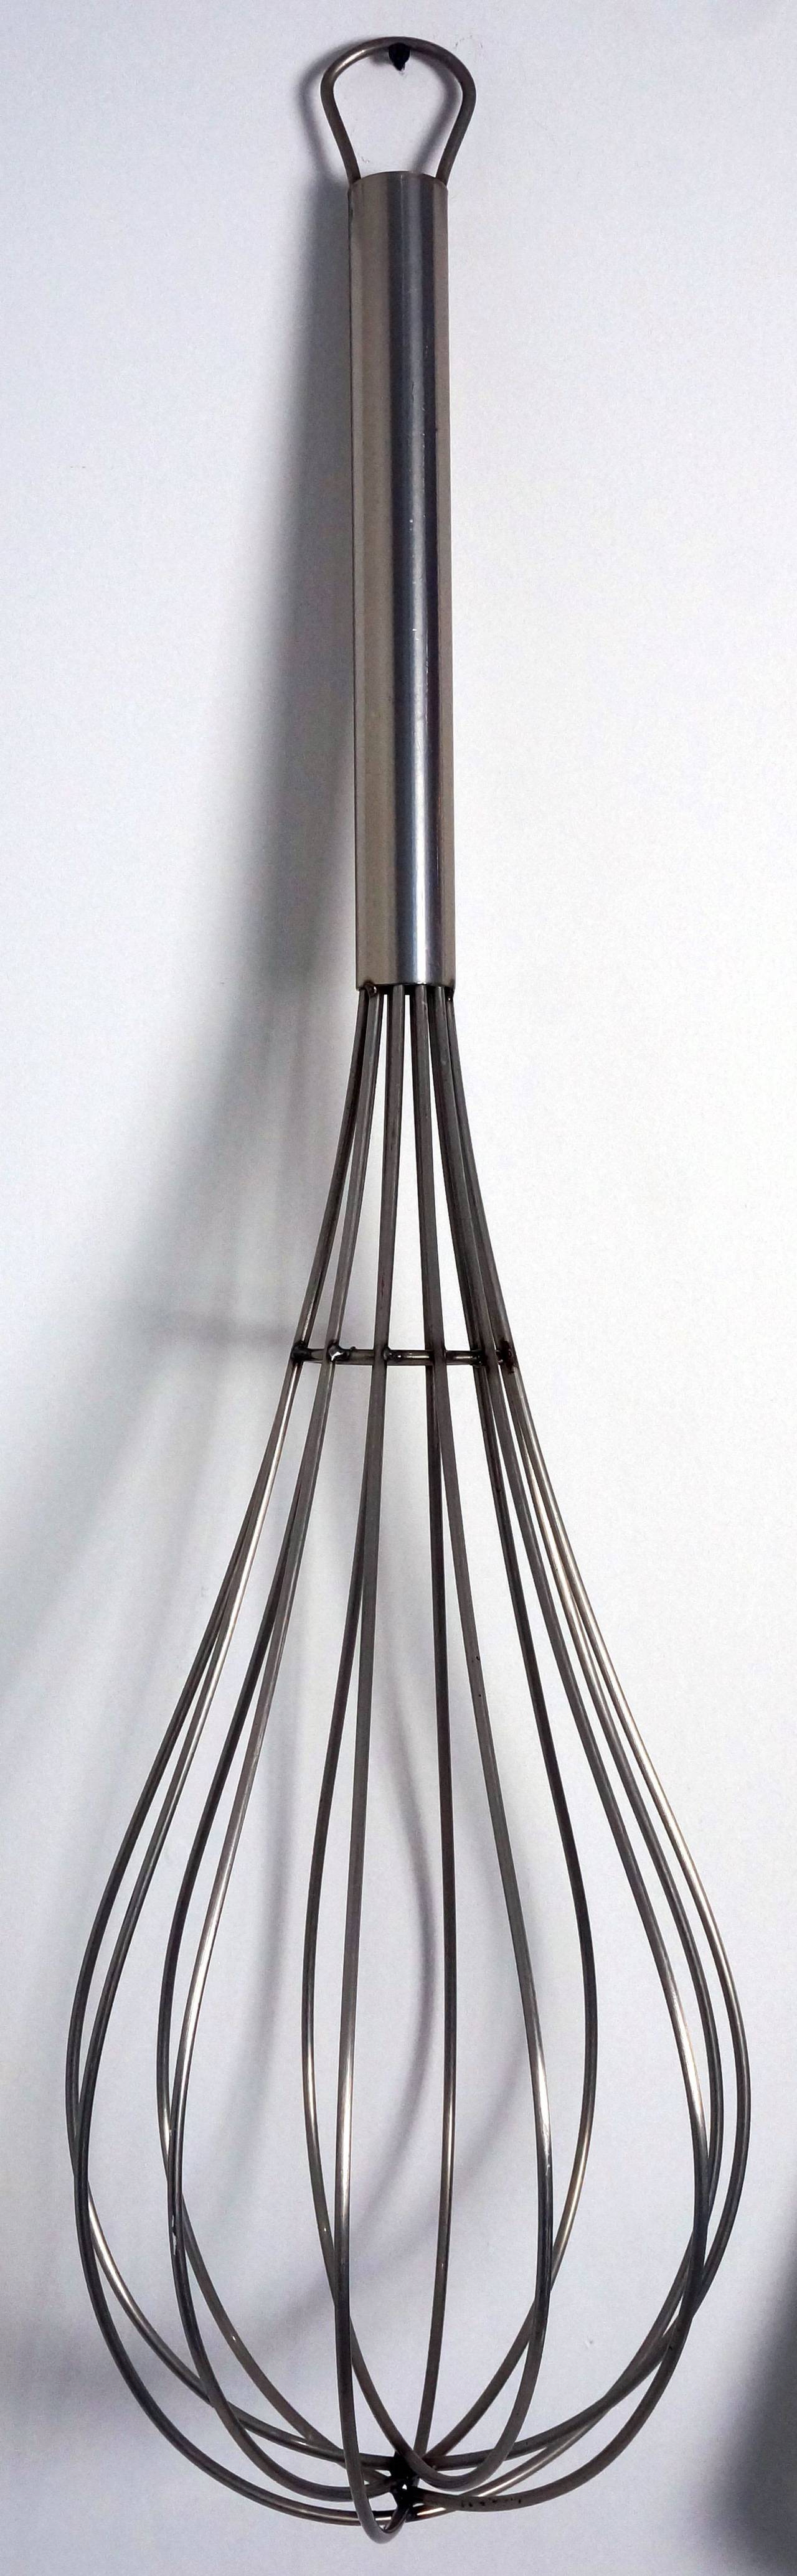 This stainless steel, over-scaled, wall-hung utensil sculpture of a whisk was created in 2000 by Curtis Jere.

For best net trade price or additional questions regarding this item, please click the 